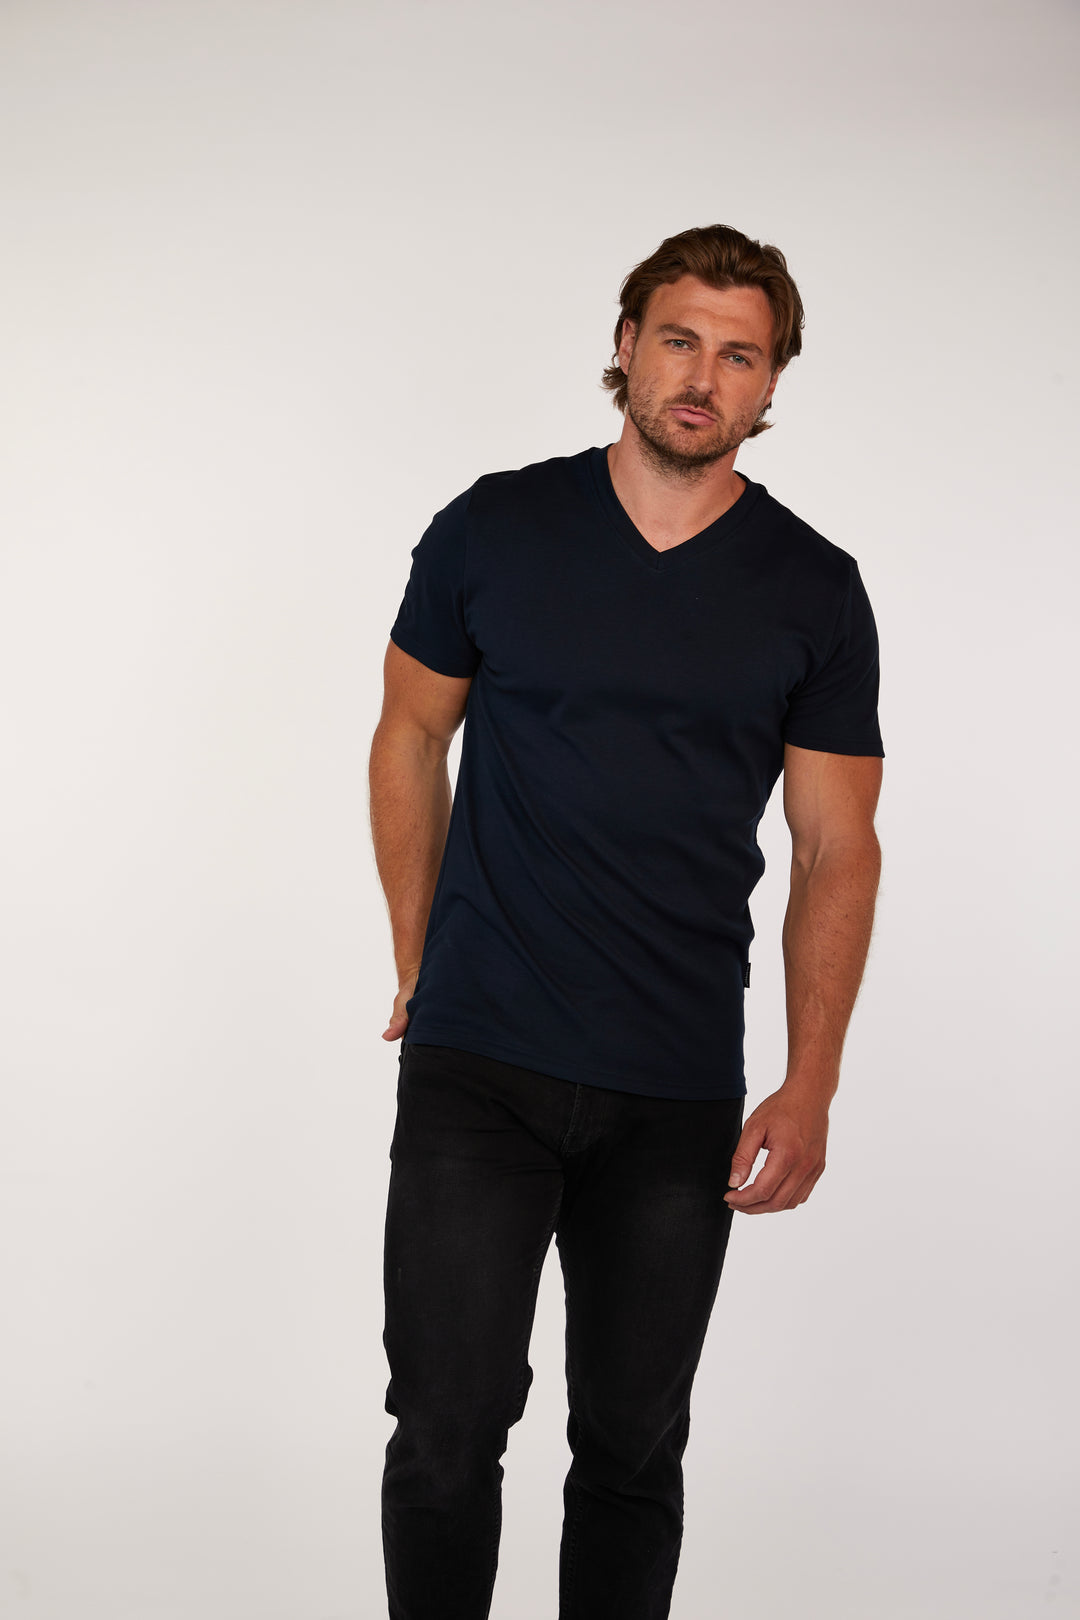 Mens Navy Muscle Fit V-Neck T-Shirt in Short Sleeve. A Proportionally Fitted and Muscle Fit V Neck. The best v neck t-shirt for muscular guys.